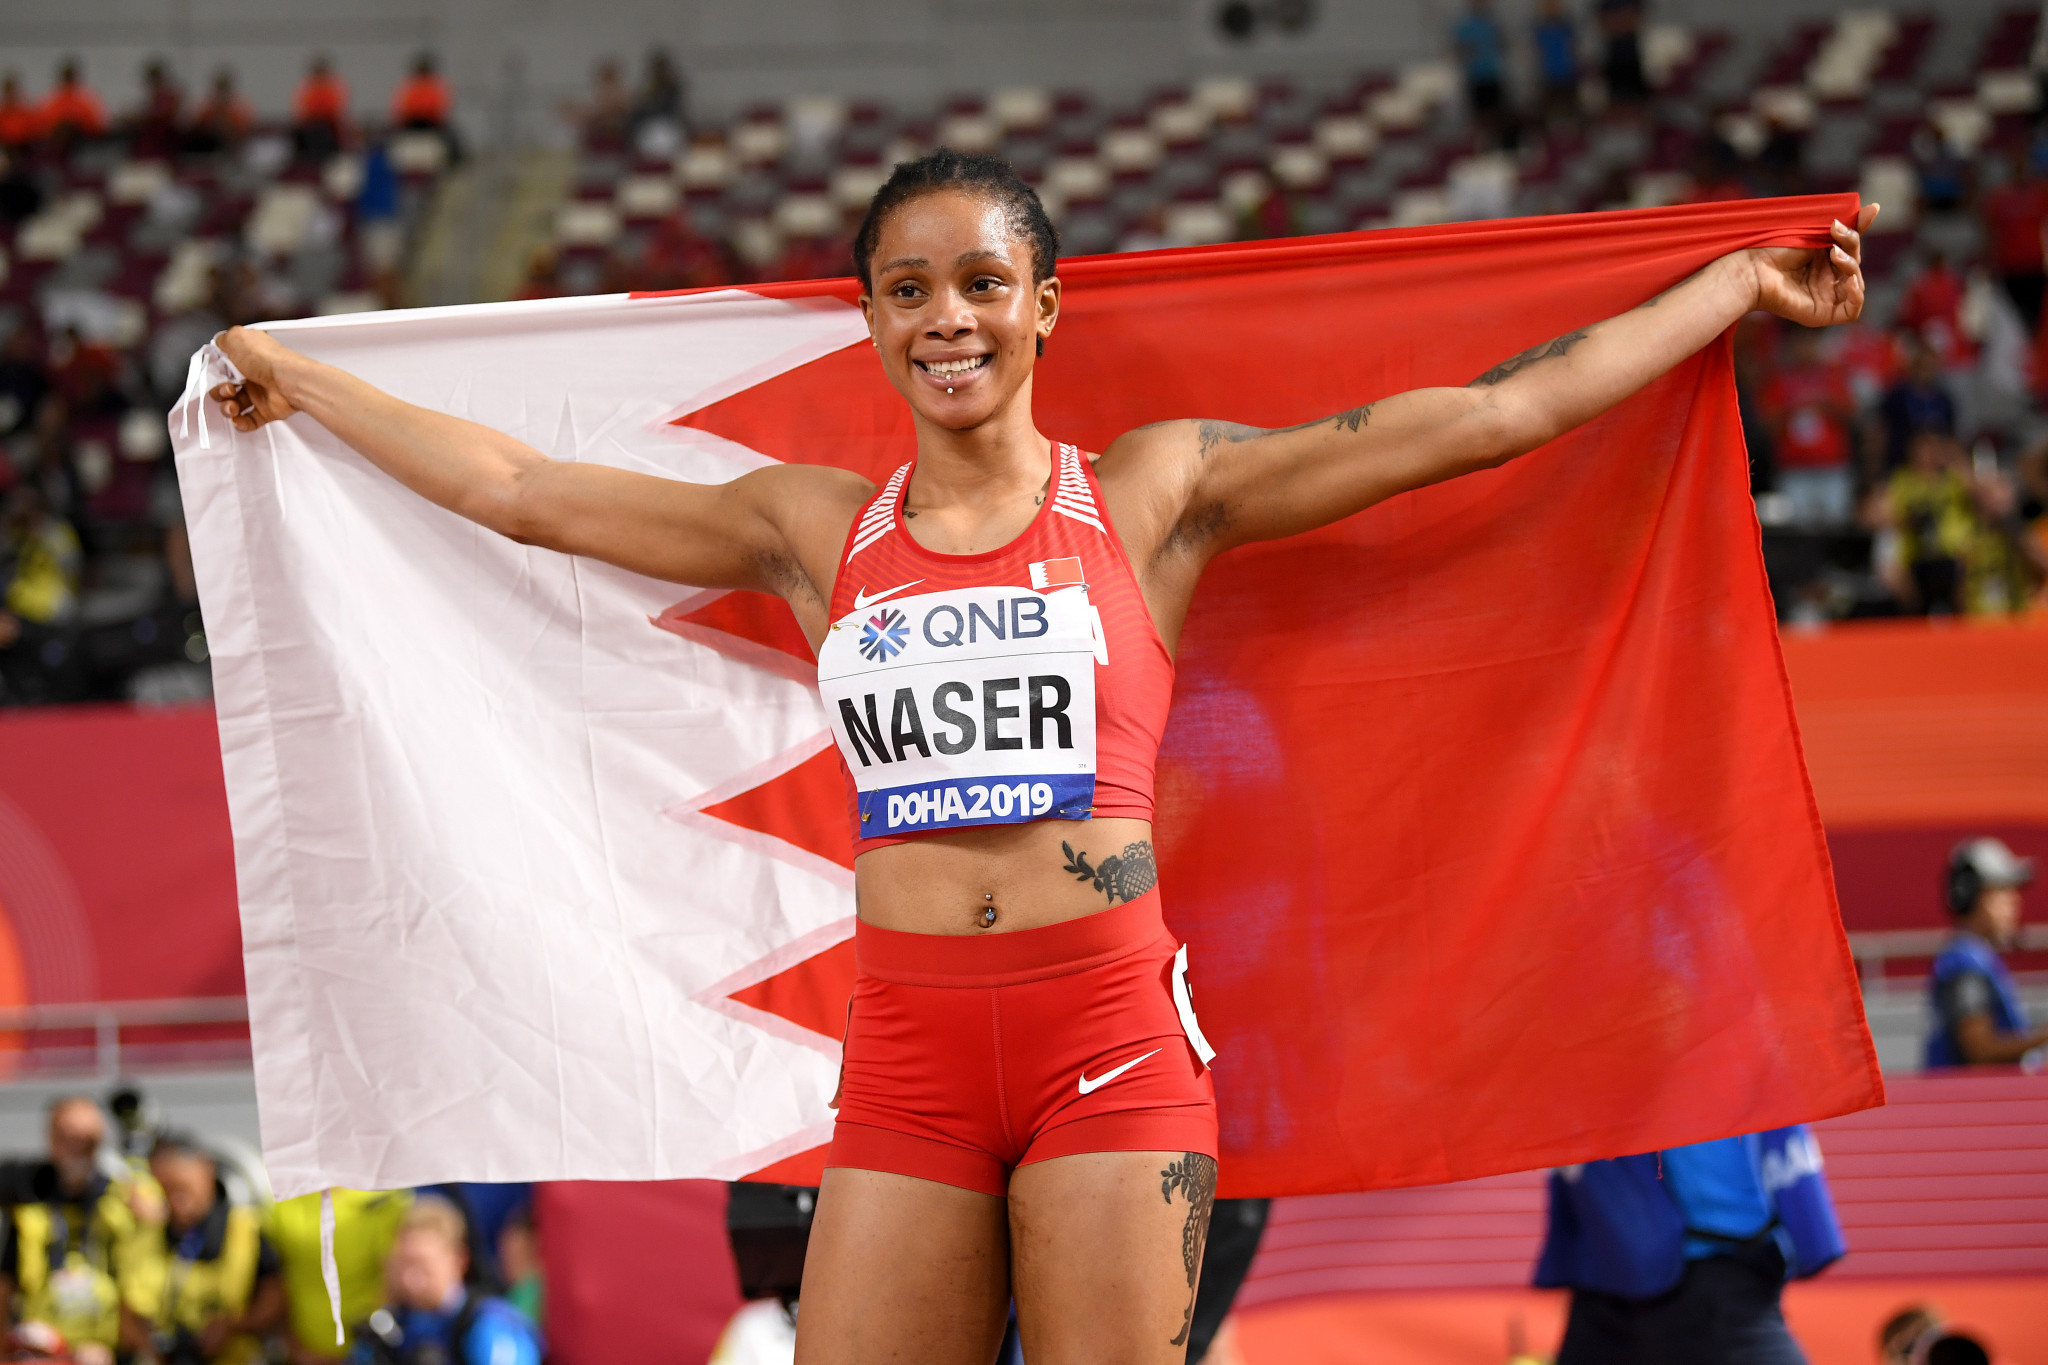 Salwa Eid Naser is another runner who switched allegiance to Bahrain but is now accused of a doping offence which could cost her the 400m gold medal she won at last year's World Athletics Championships in Doha ©Getty Images